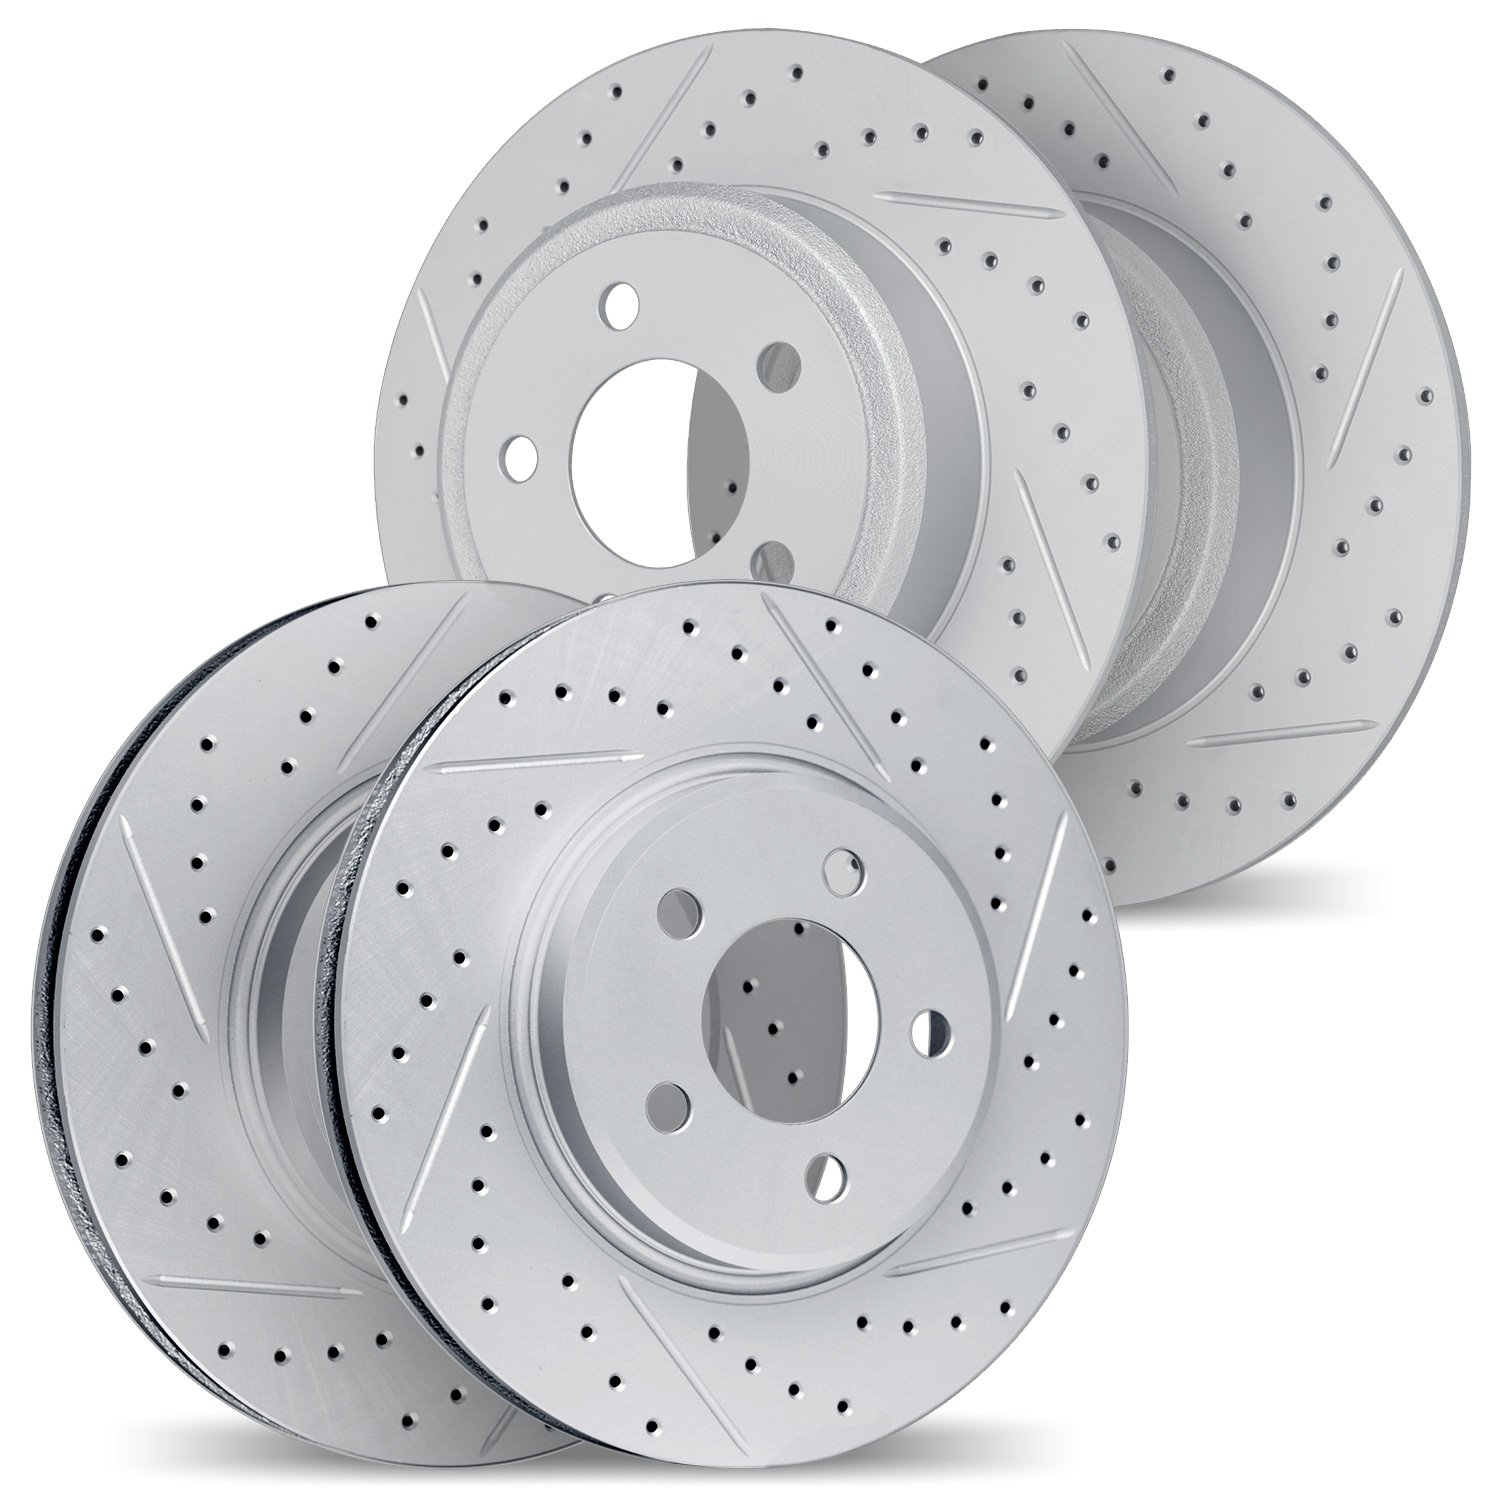 2004-54071 Geoperformance Drilled/Slotted Brake Rotors, 2003-2005 Ford/Lincoln/Mercury/Mazda, Position: Front and Rear